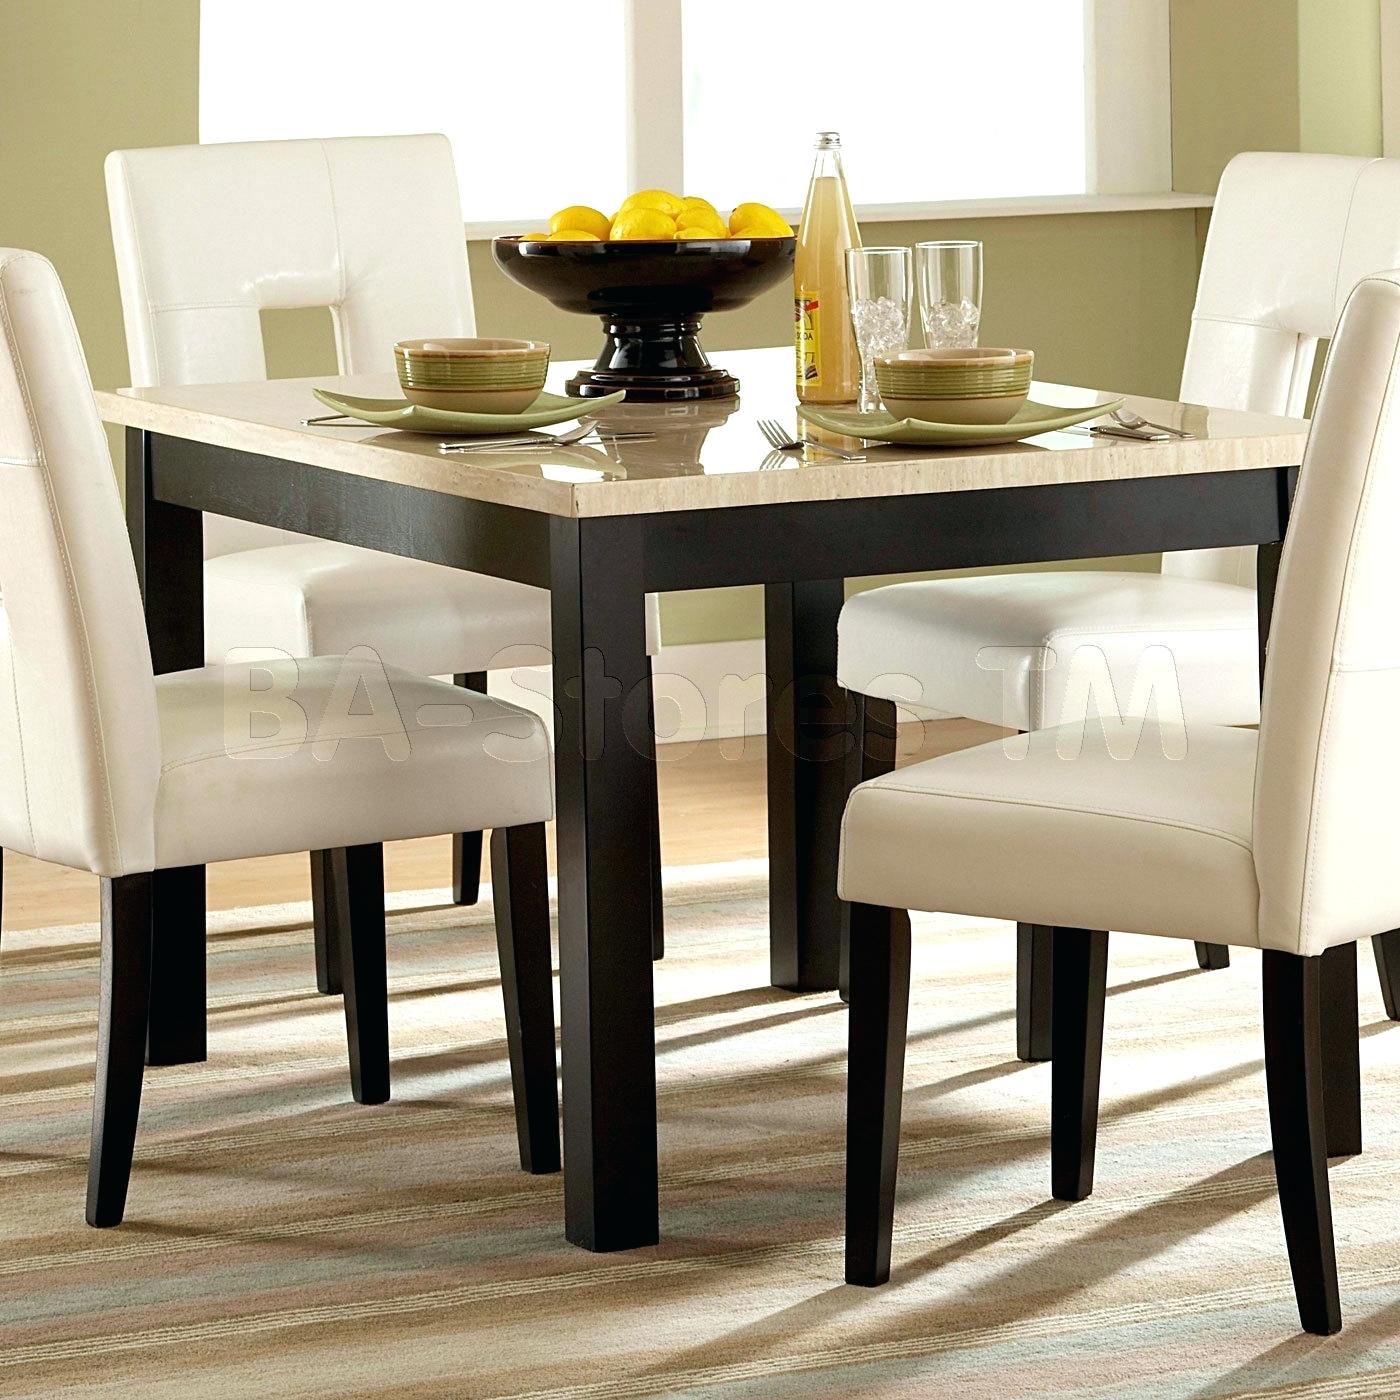 Square dining table seats 12 | Hawk Haven